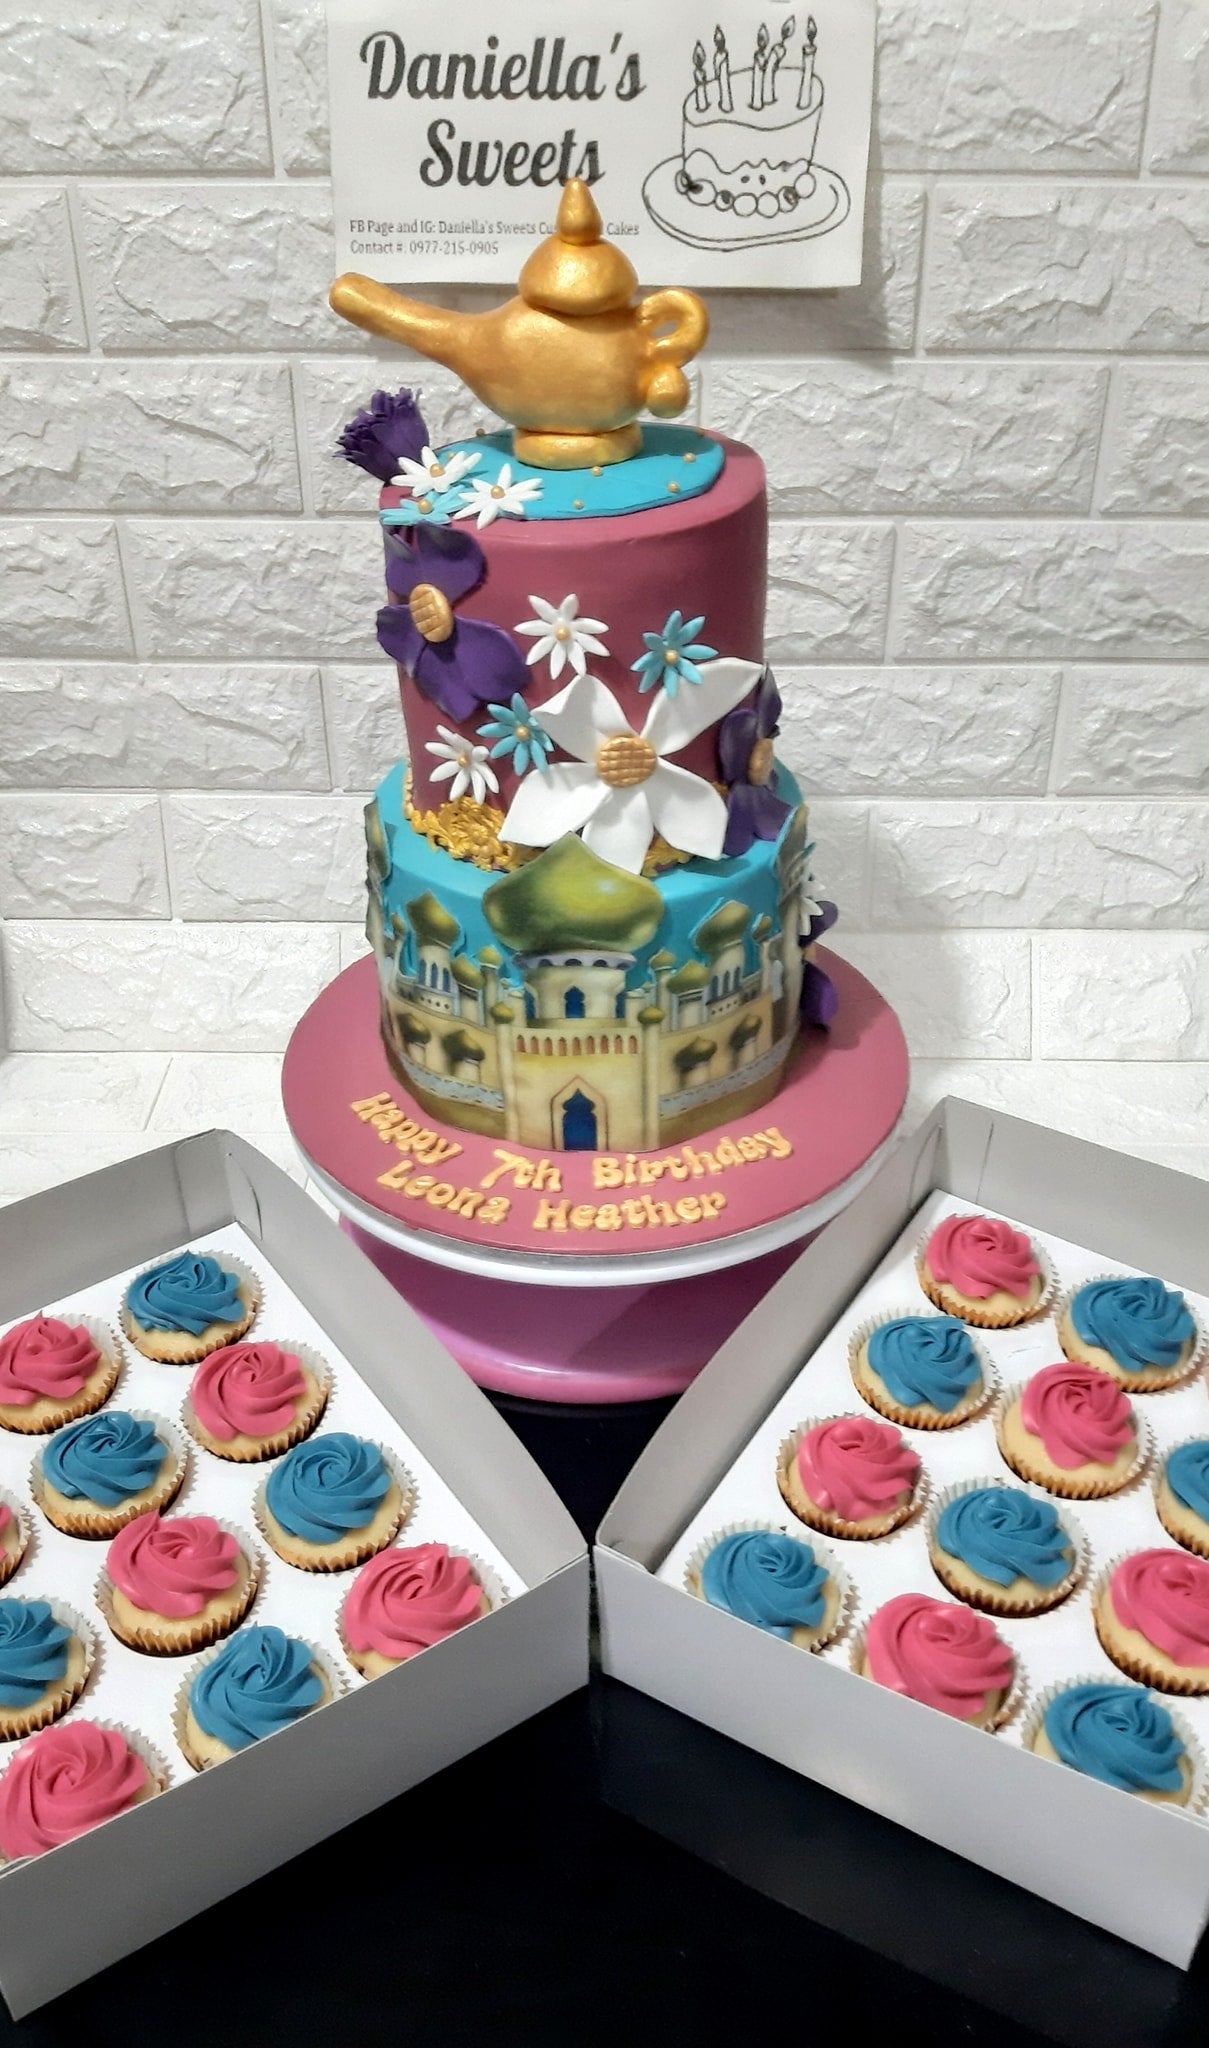 Complete Your Celebrations with These Customised Cakes in Dubai